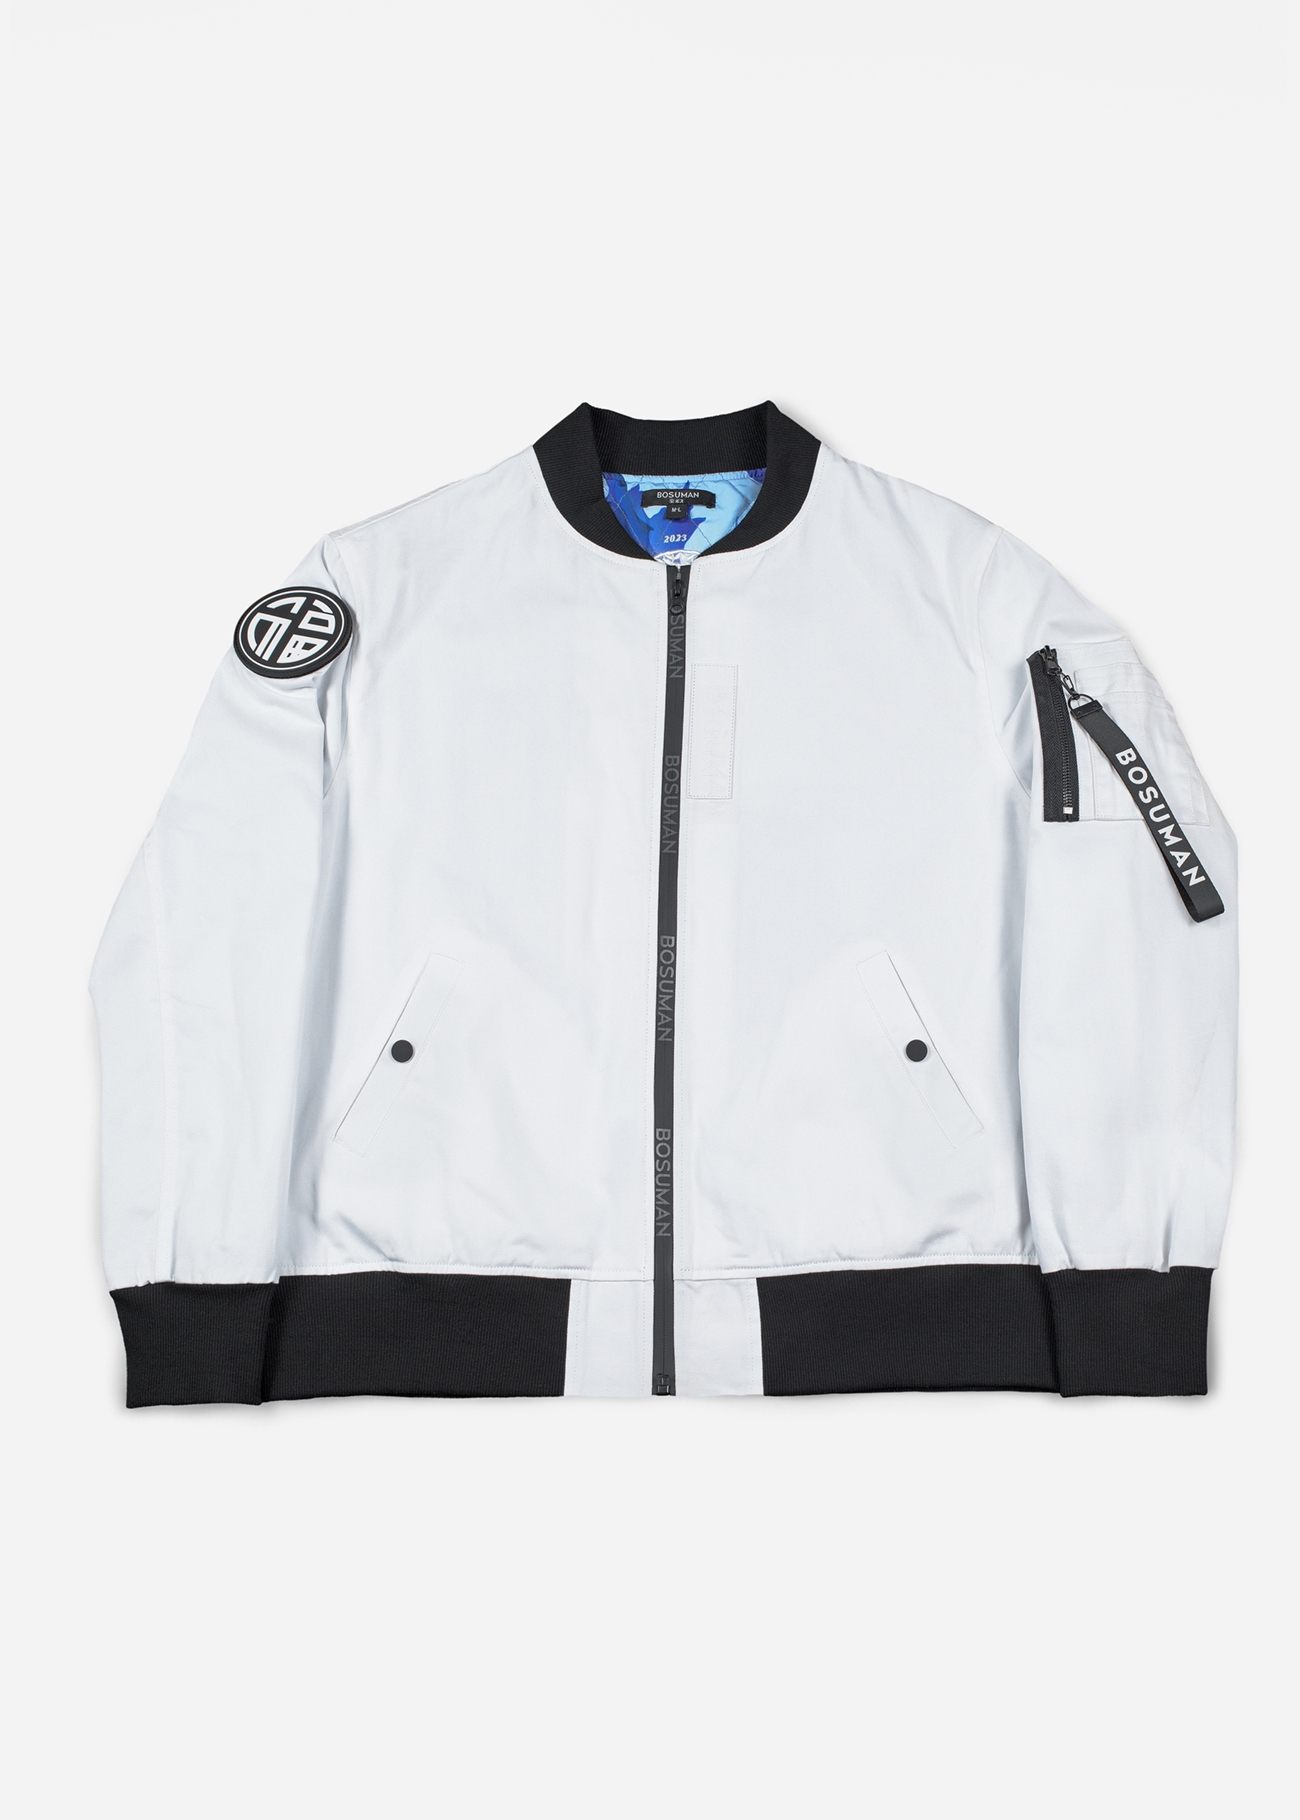 Photo of the front of Zodiac Bomber Jacket featuring Rabbit embroidery on a white piece of clothing